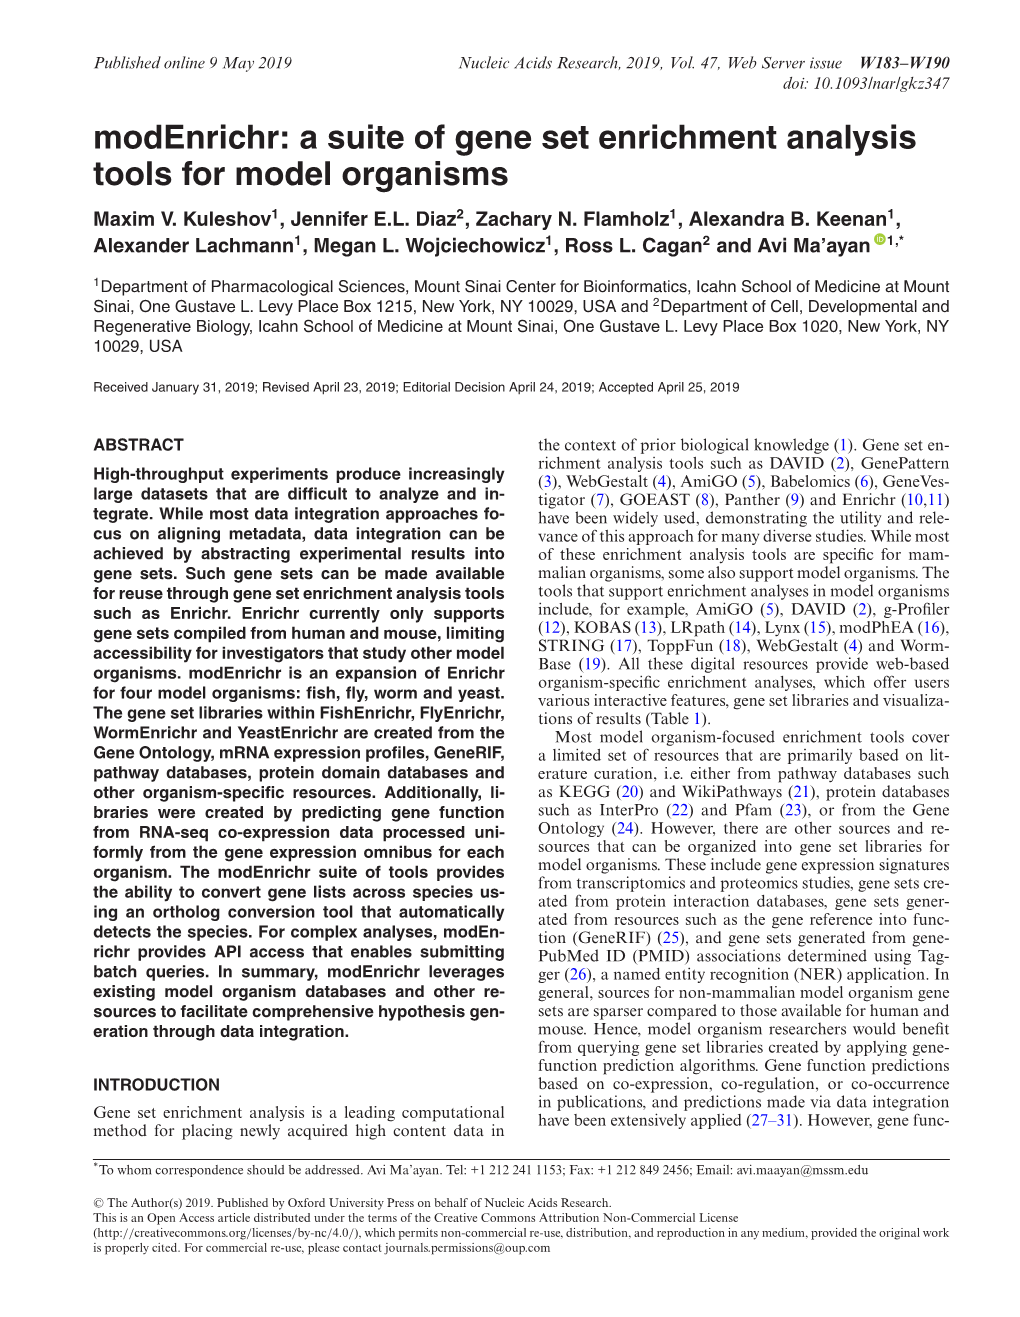 Modenrichr: a Suite of Gene Set Enrichment Analysis Tools for Model Organisms Maxim V